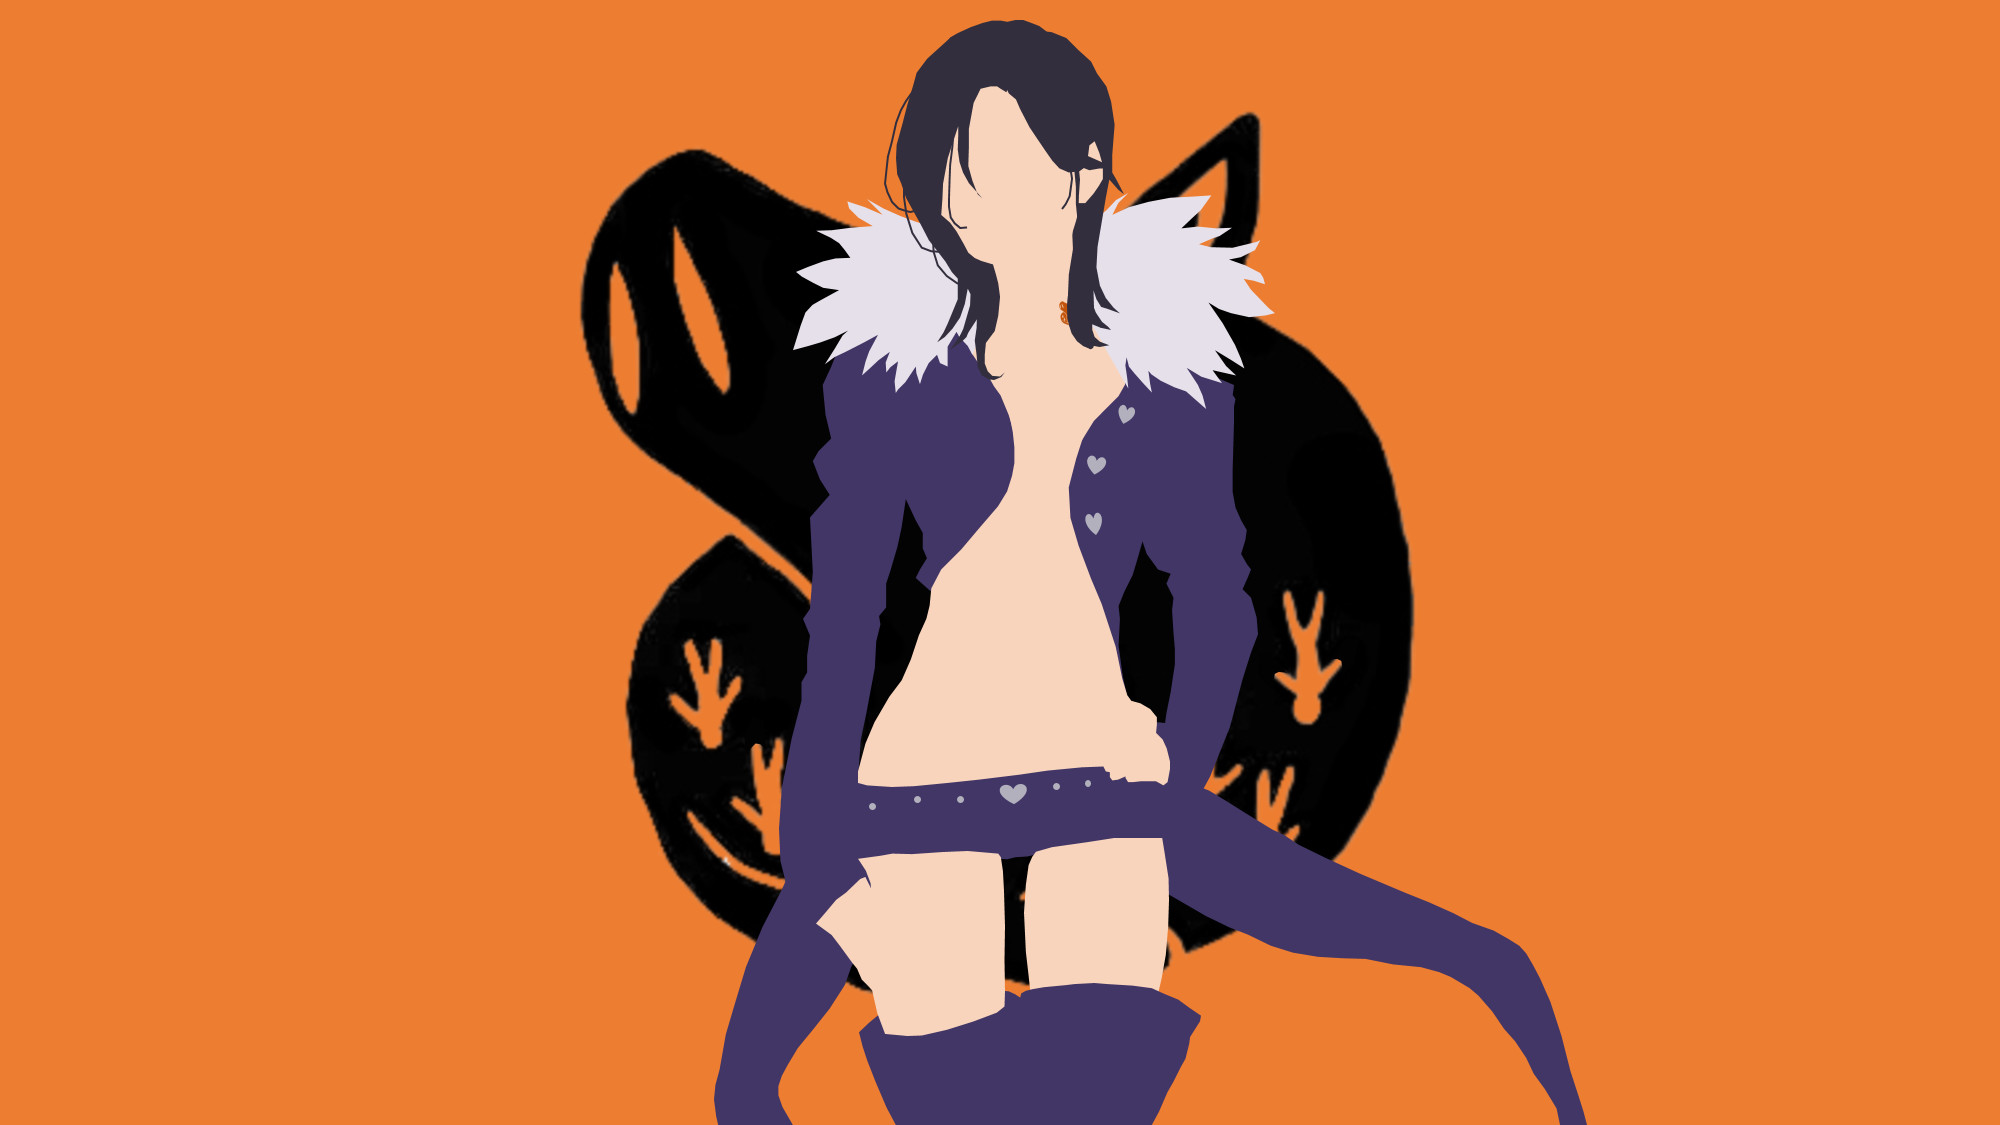 Gowther from Seven Deadly Sins by Reverendtundra Minimalism Pinterest Anime, Manga and Otaku